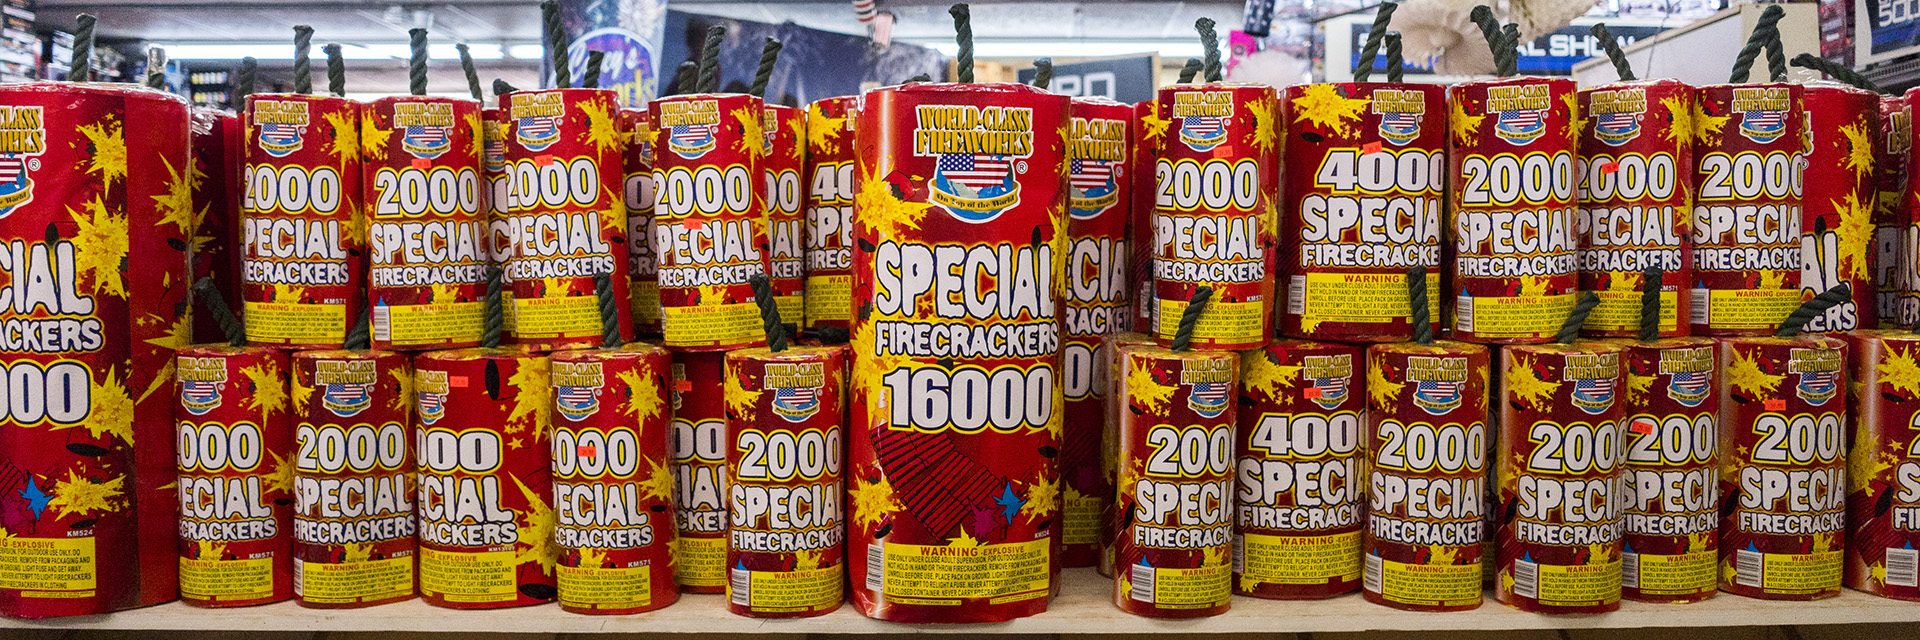 Fireworks shortage in 2021? Not at Casey's, where we have a full stock and superior selection